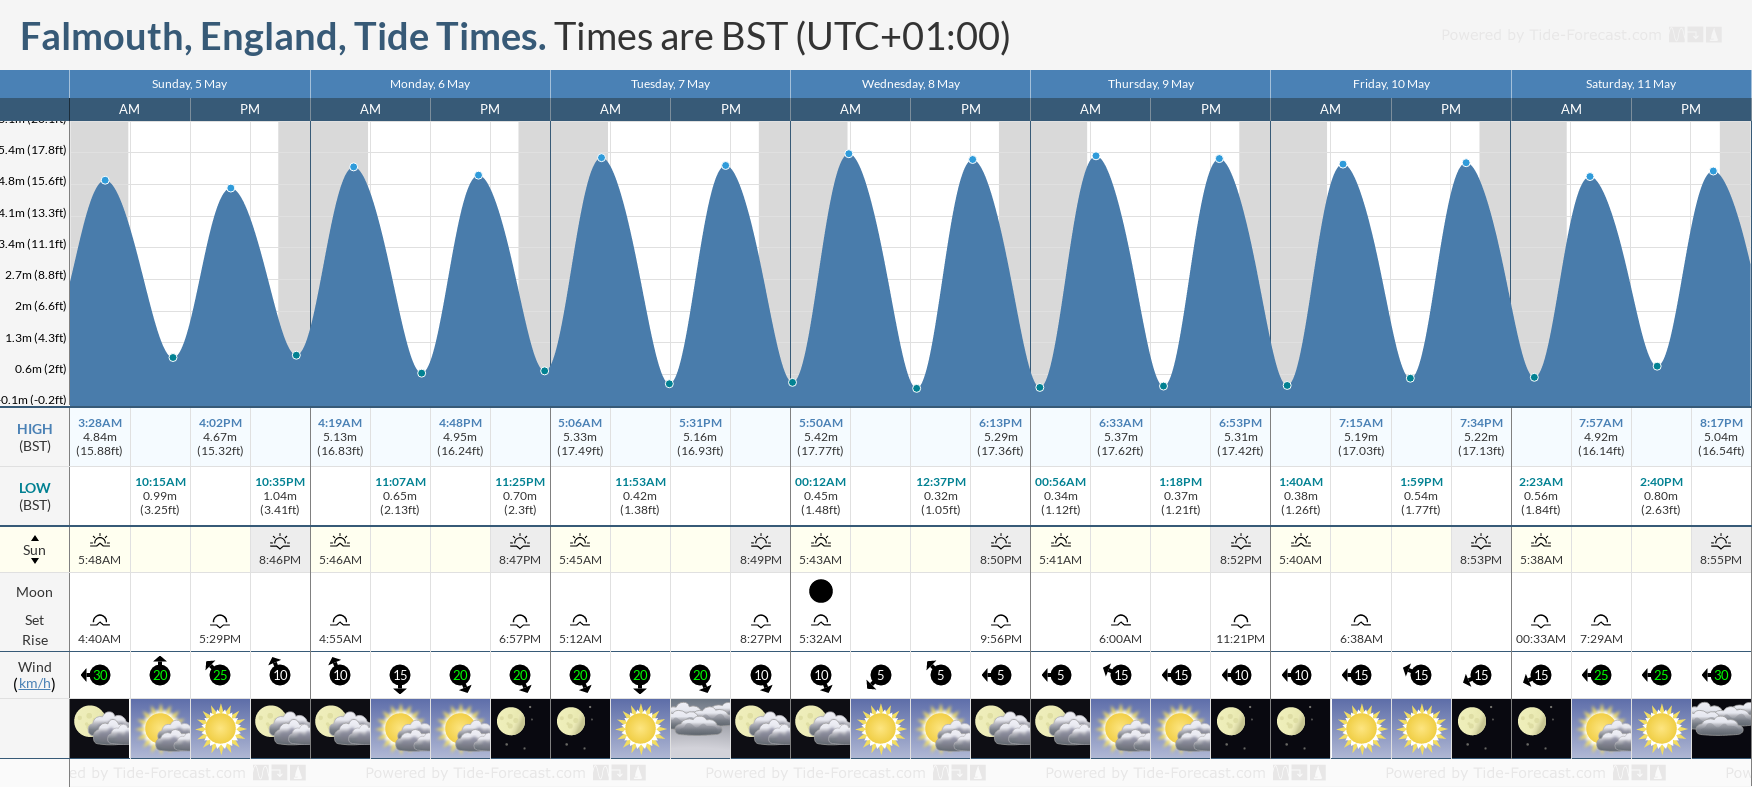 Falmouth, England Tide Chart including high and low tide tide times for the next 7 days